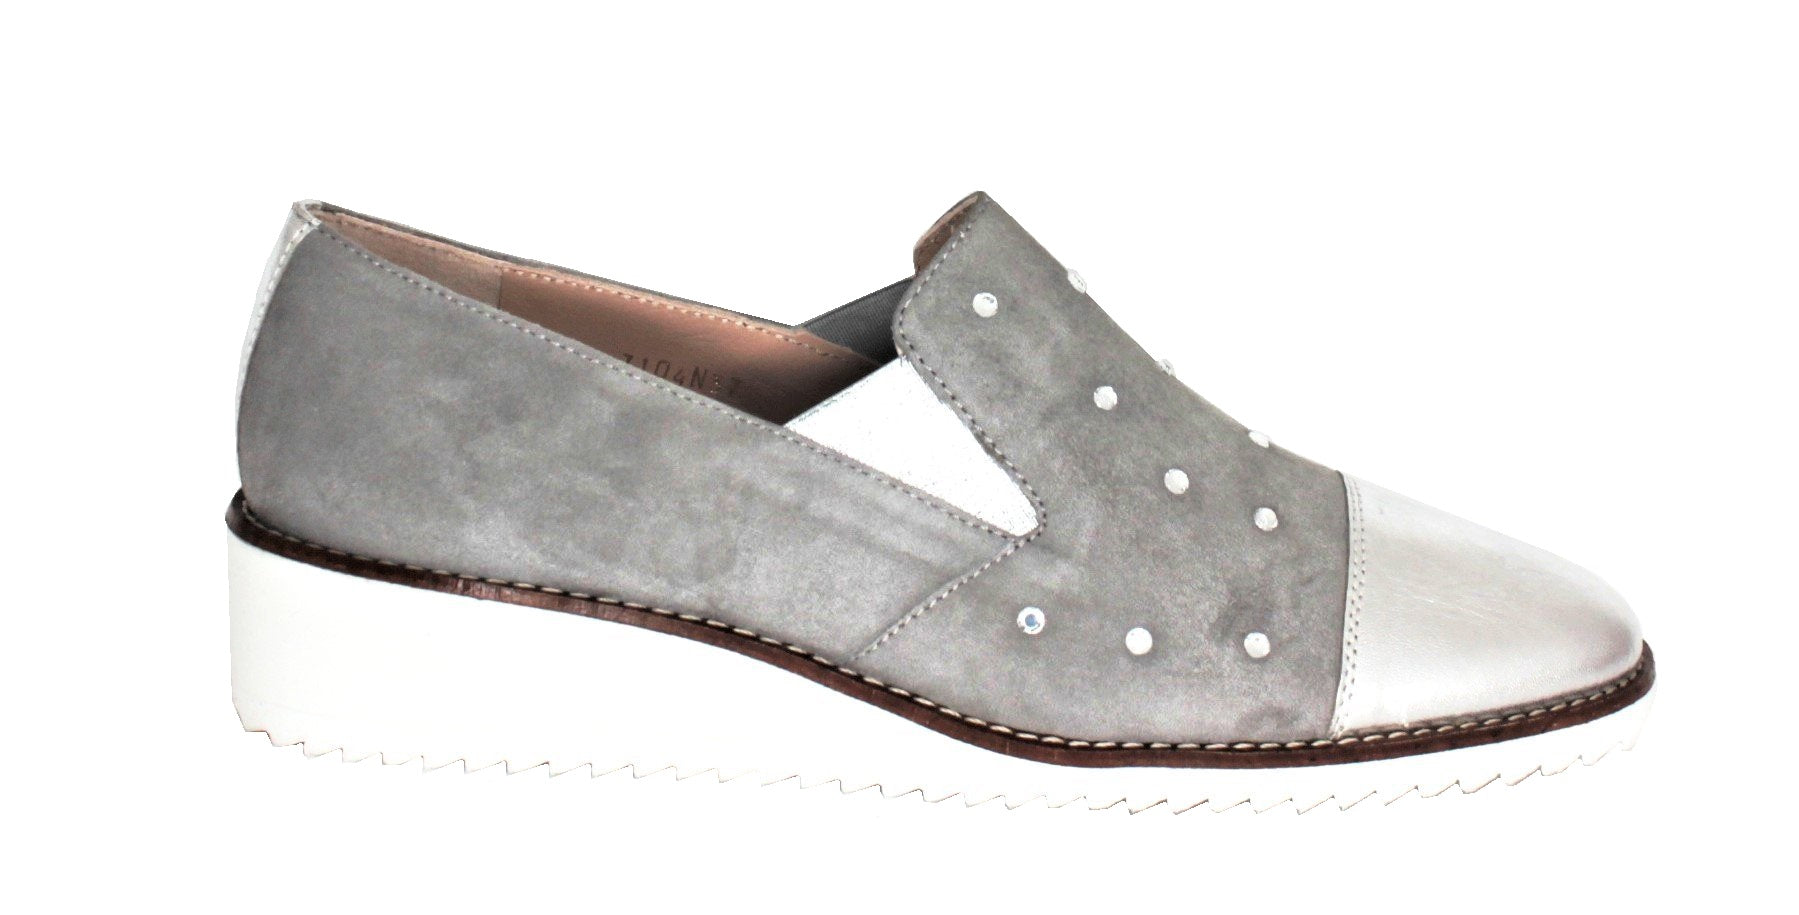 Wedge Heel Loafer With Diamante Trim